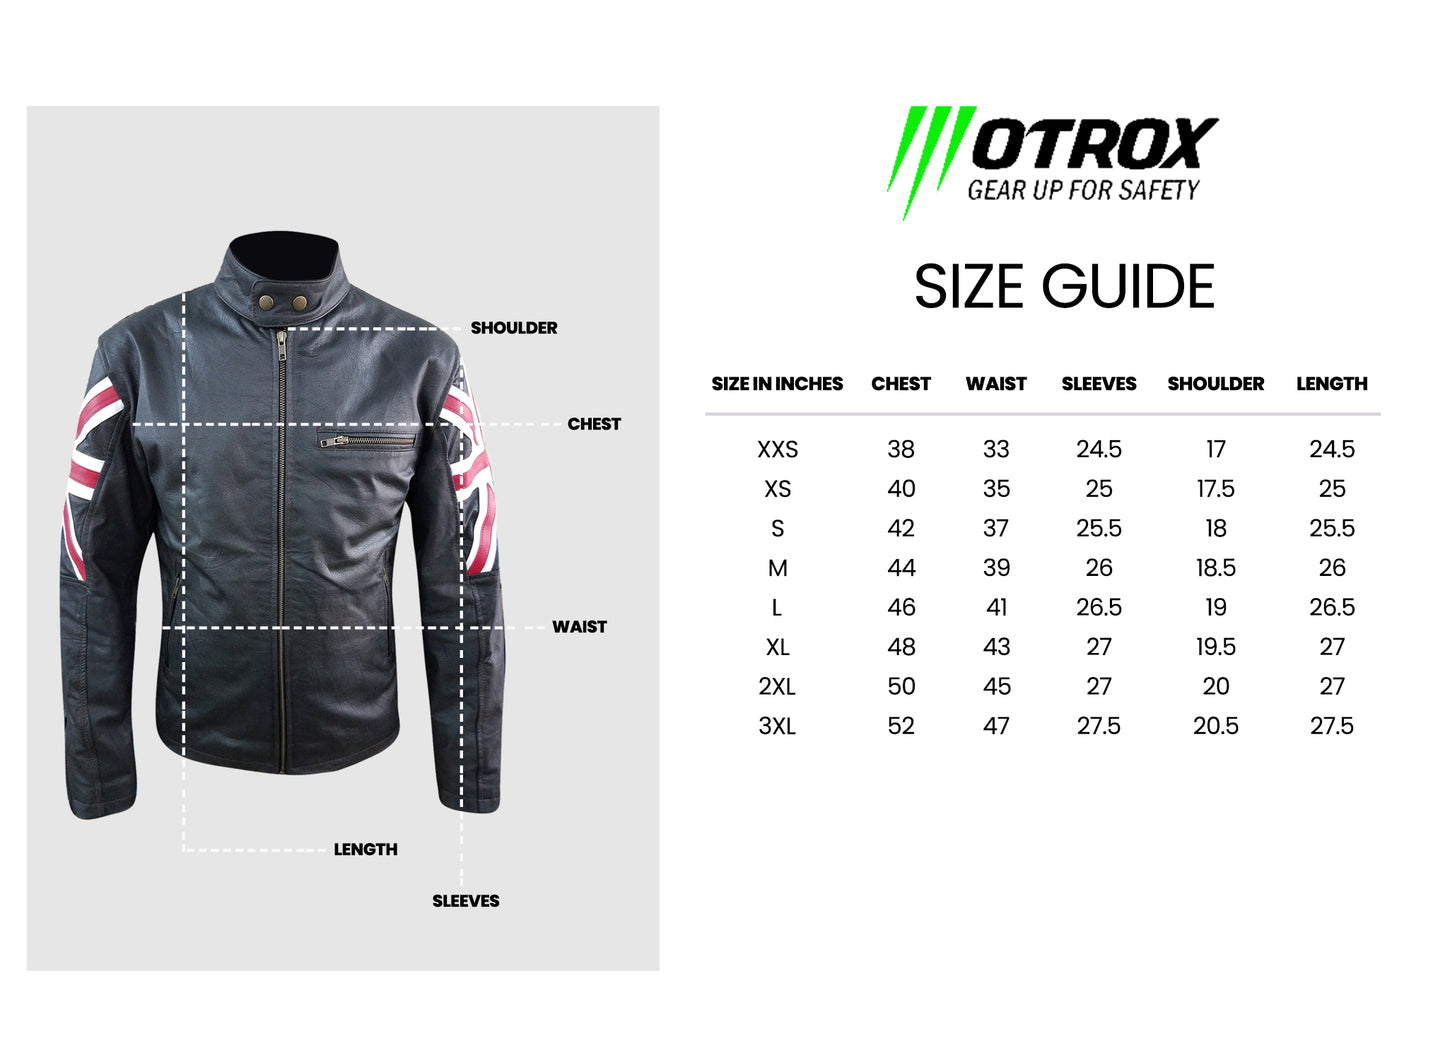 Motorbike Leather Jacket in Incredible style M0trox